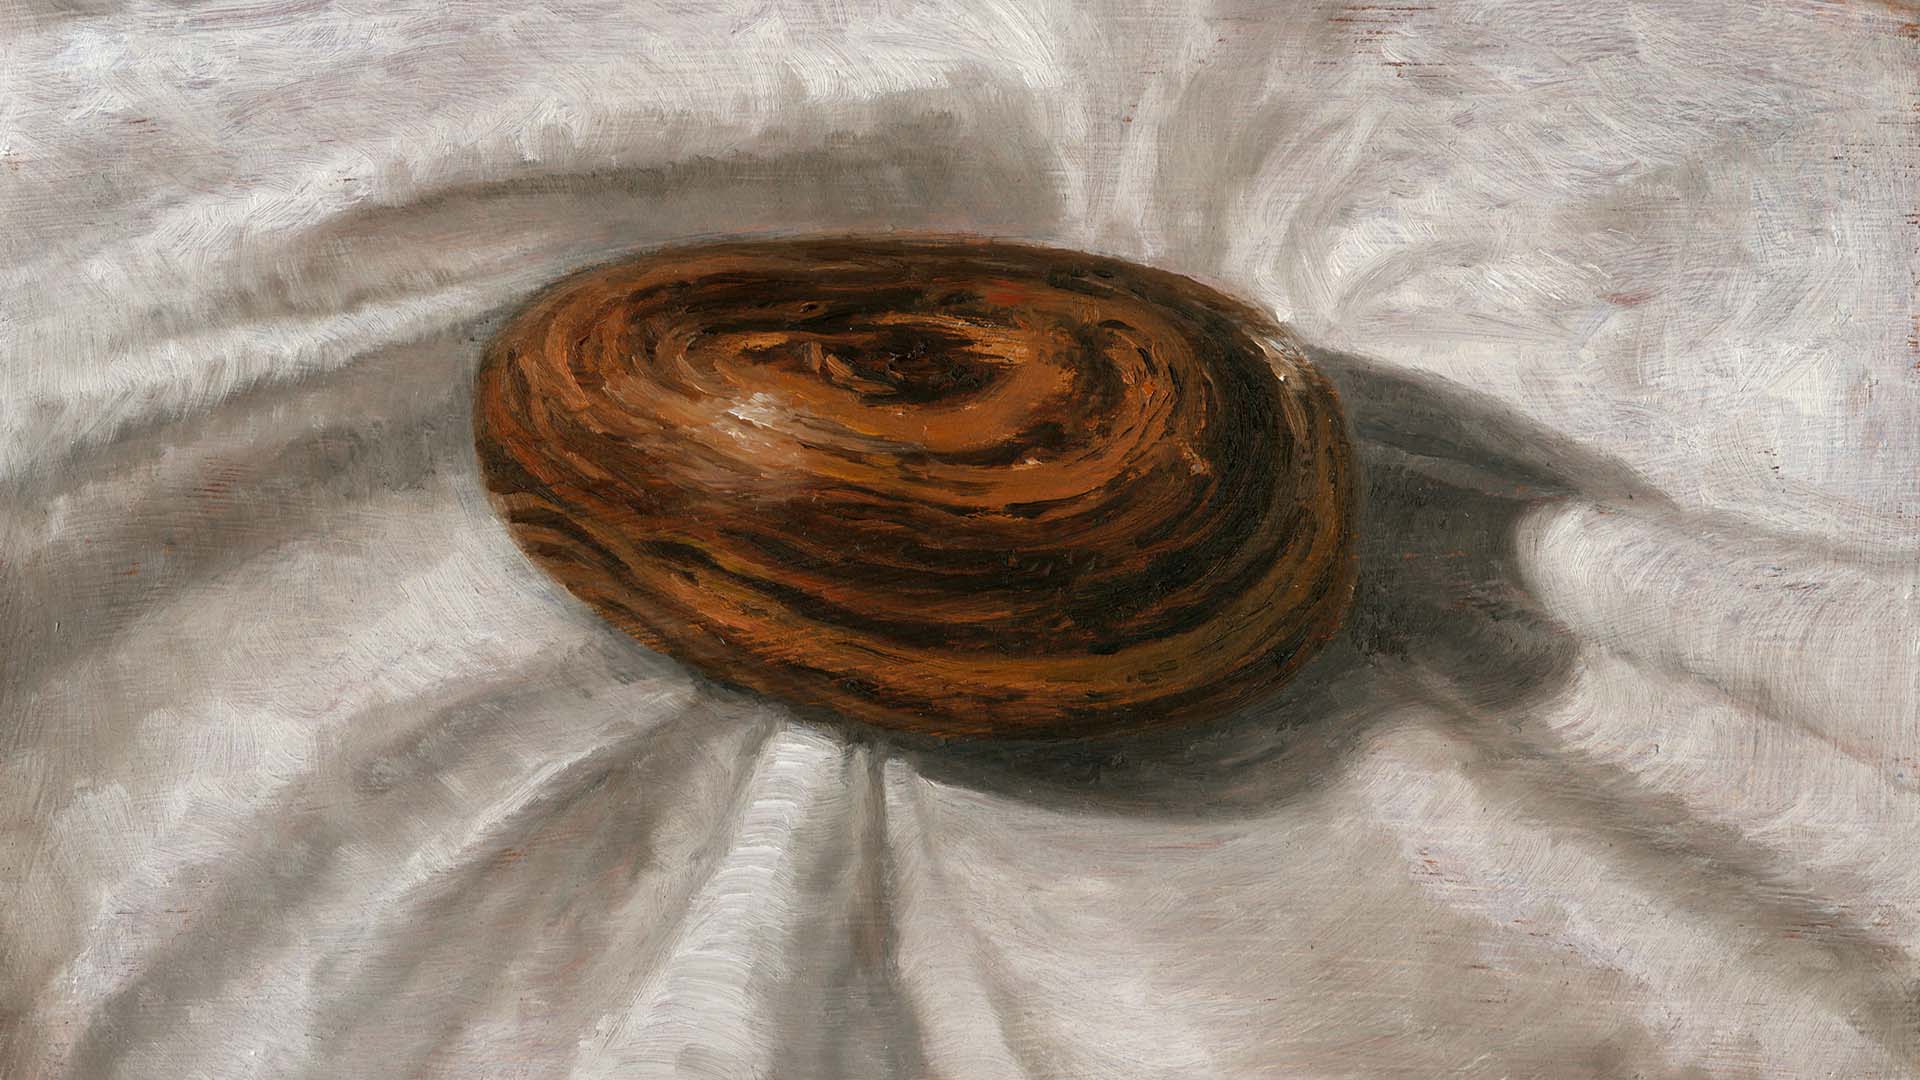 Painting of a seer stone by Anthony Sweat.